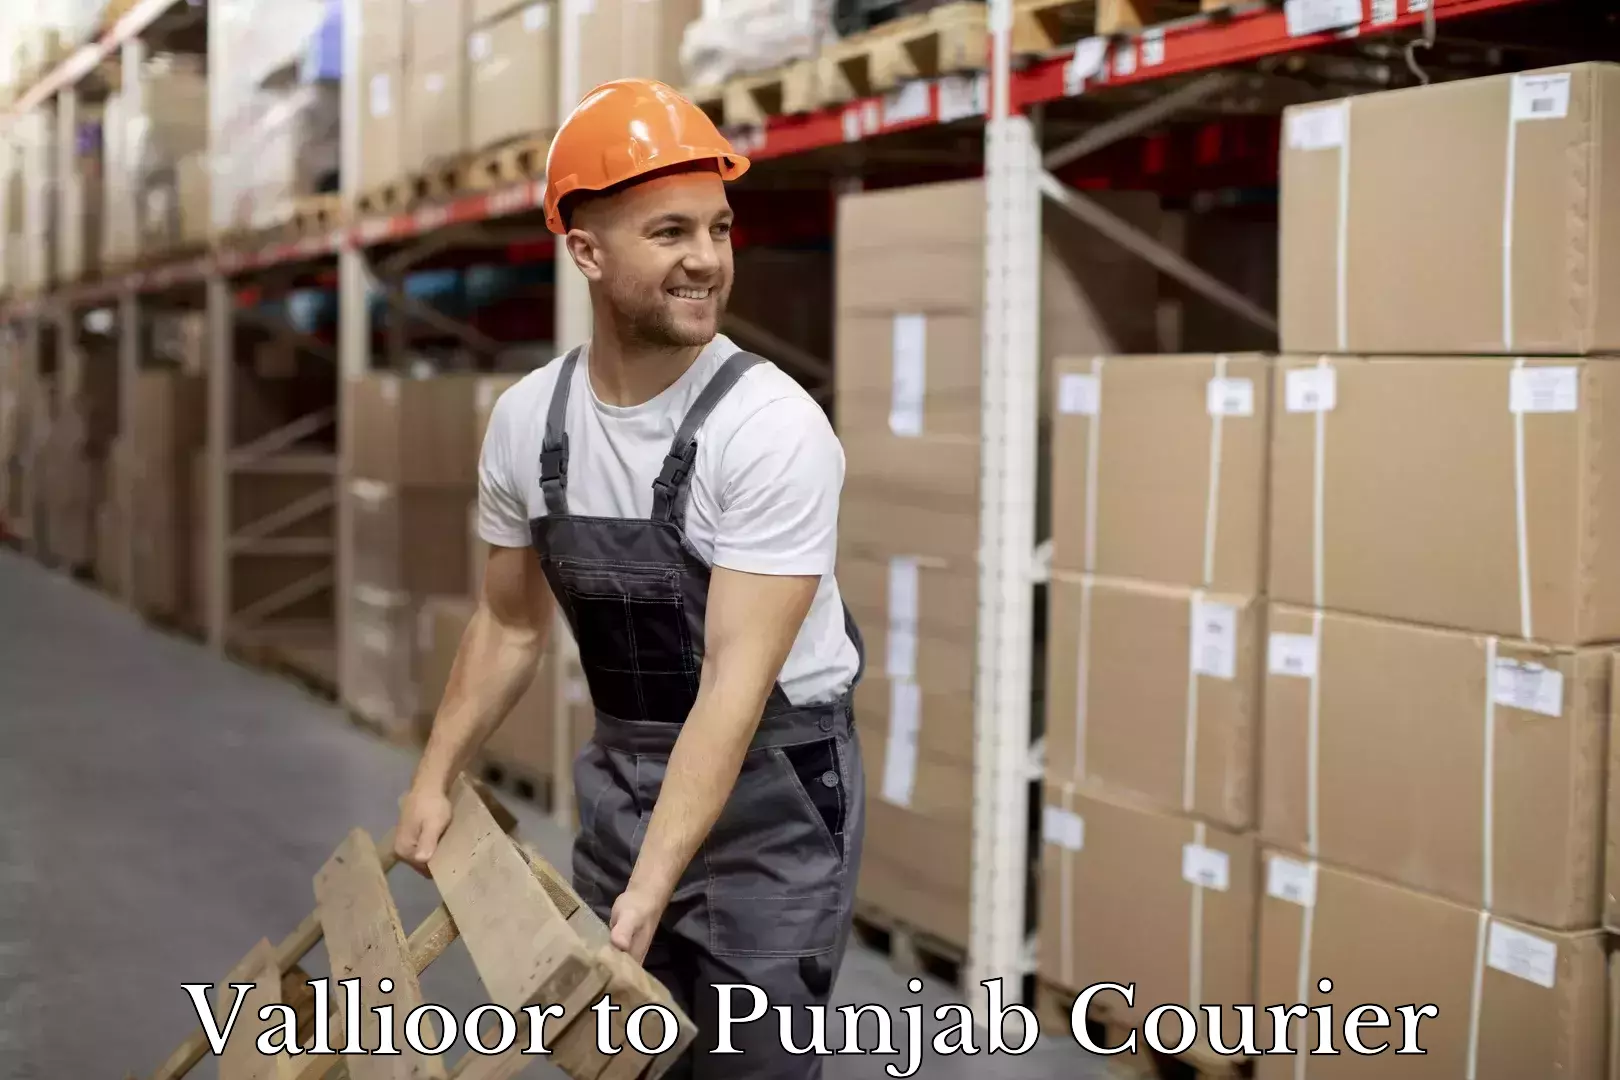 Cash on delivery service Vallioor to Punjab